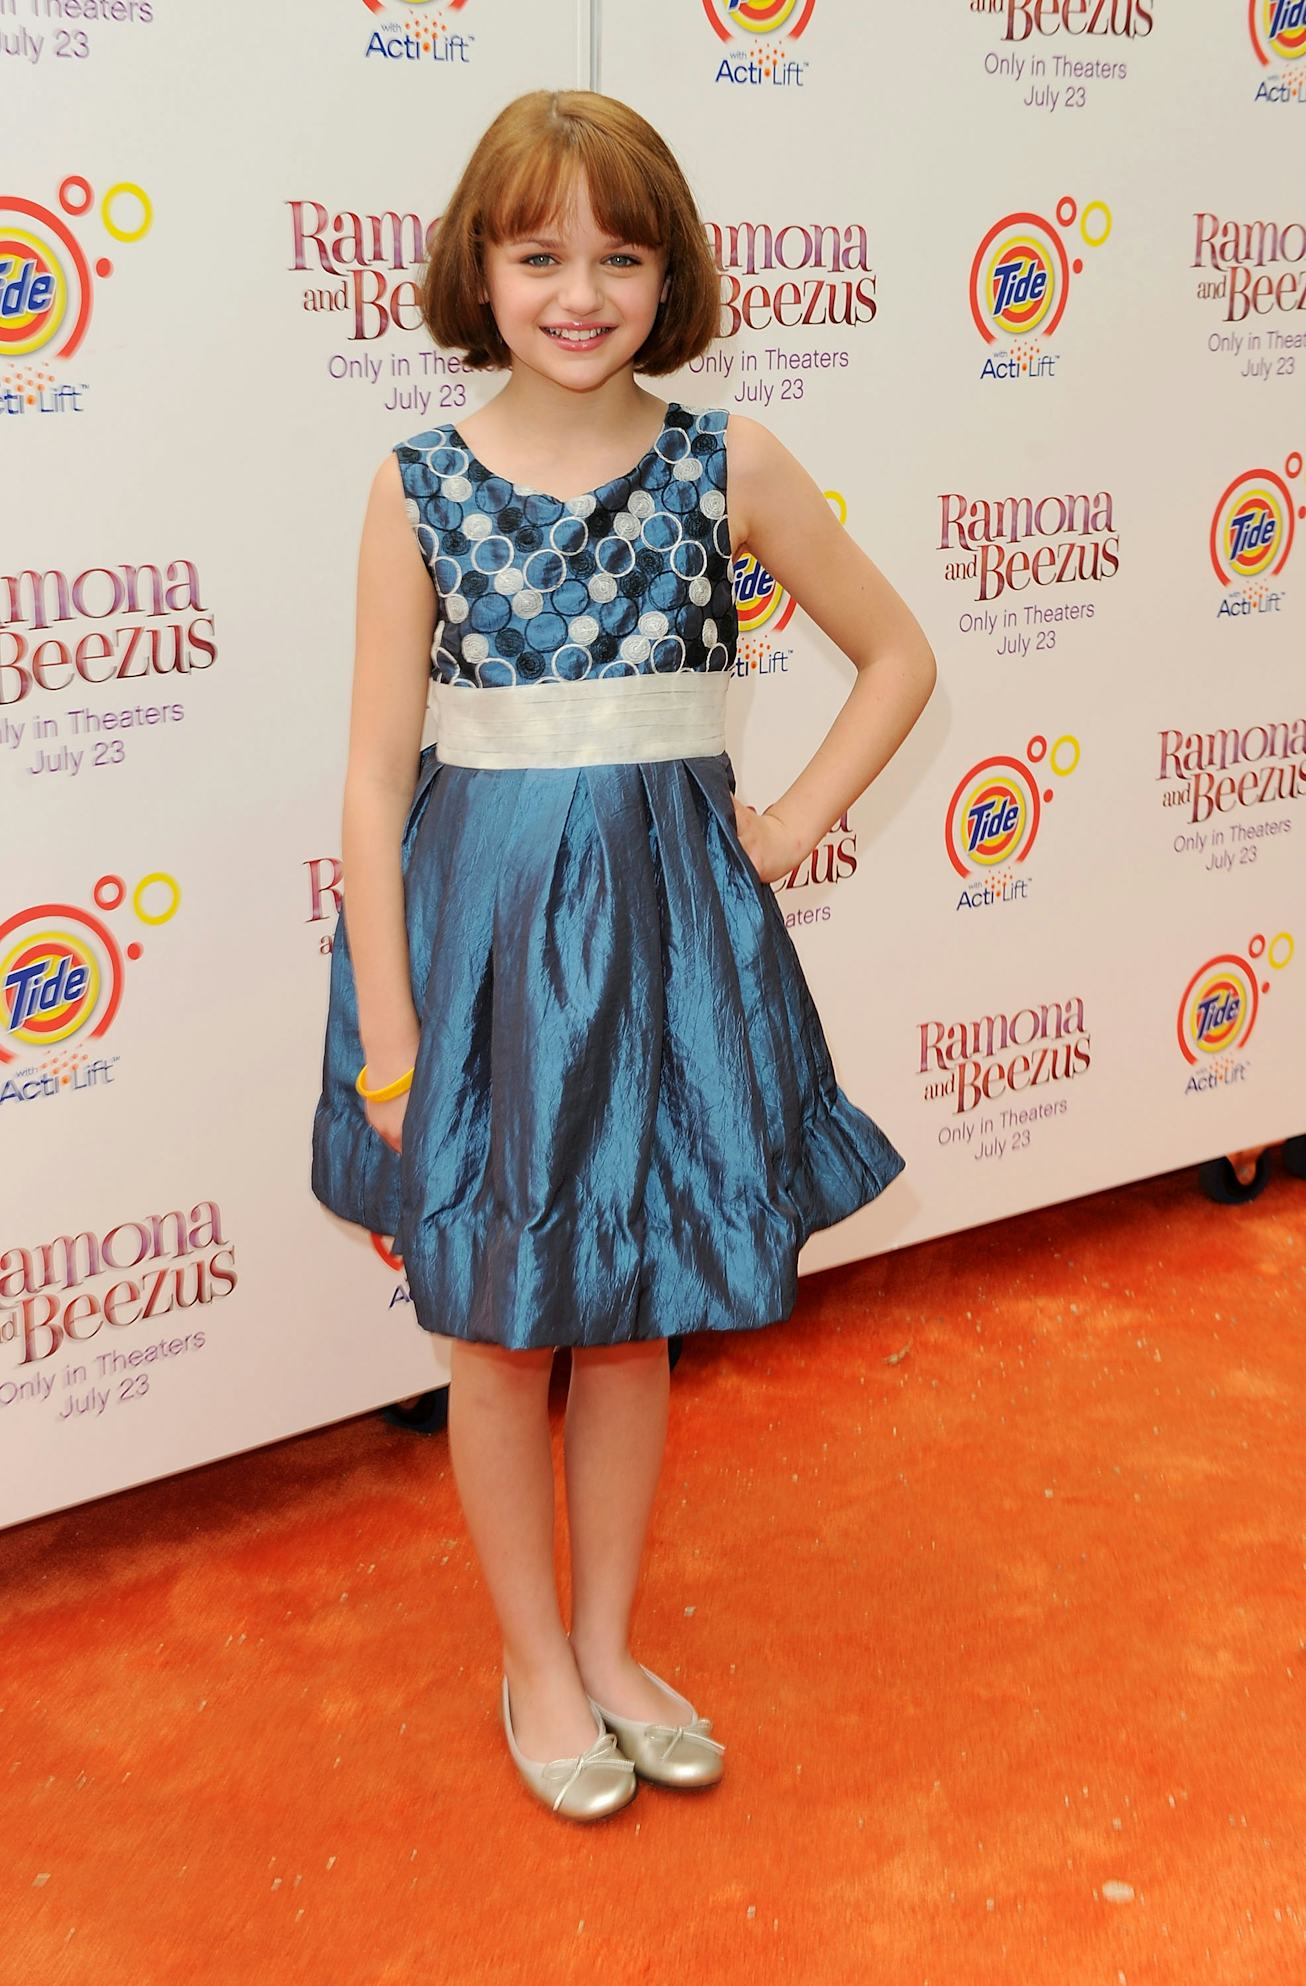 NEW YORK - JULY 20:  Actress Joey King attends the premiere of "Ramona and Beezus" in Madison Square...